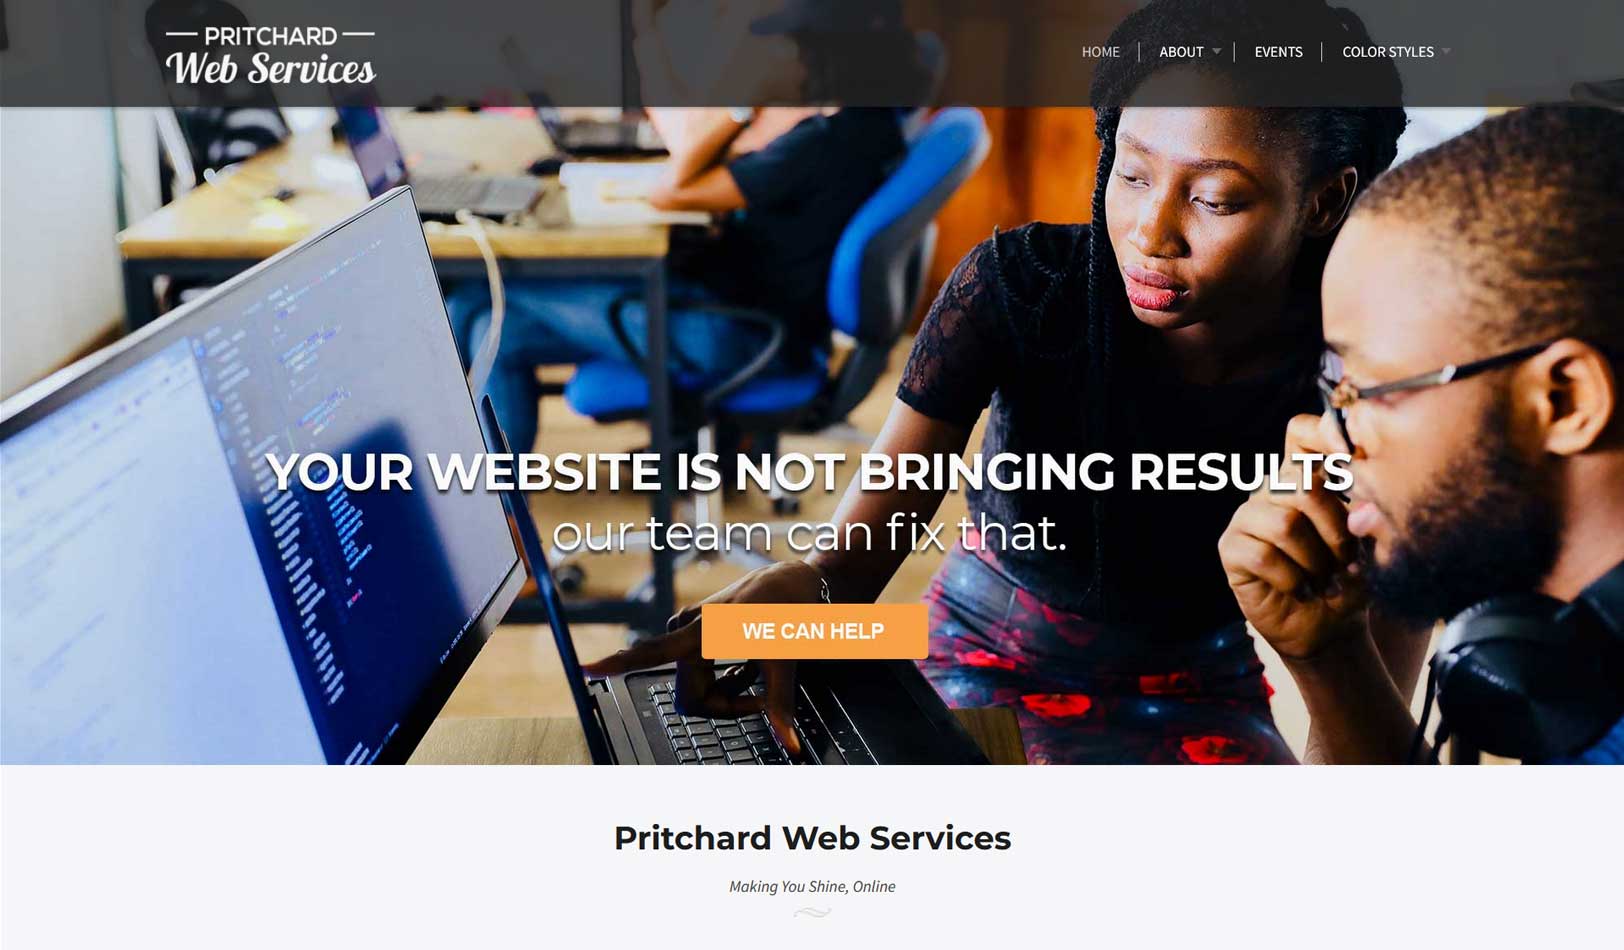 images/Portfolio-images/Our-Custom-Website-Themes/a1-colors.jpg#joomlaImage://local-images/Portfolio-images/Our-Custom-Website-Themes/a1-colors.jpg?width=1624&height=950